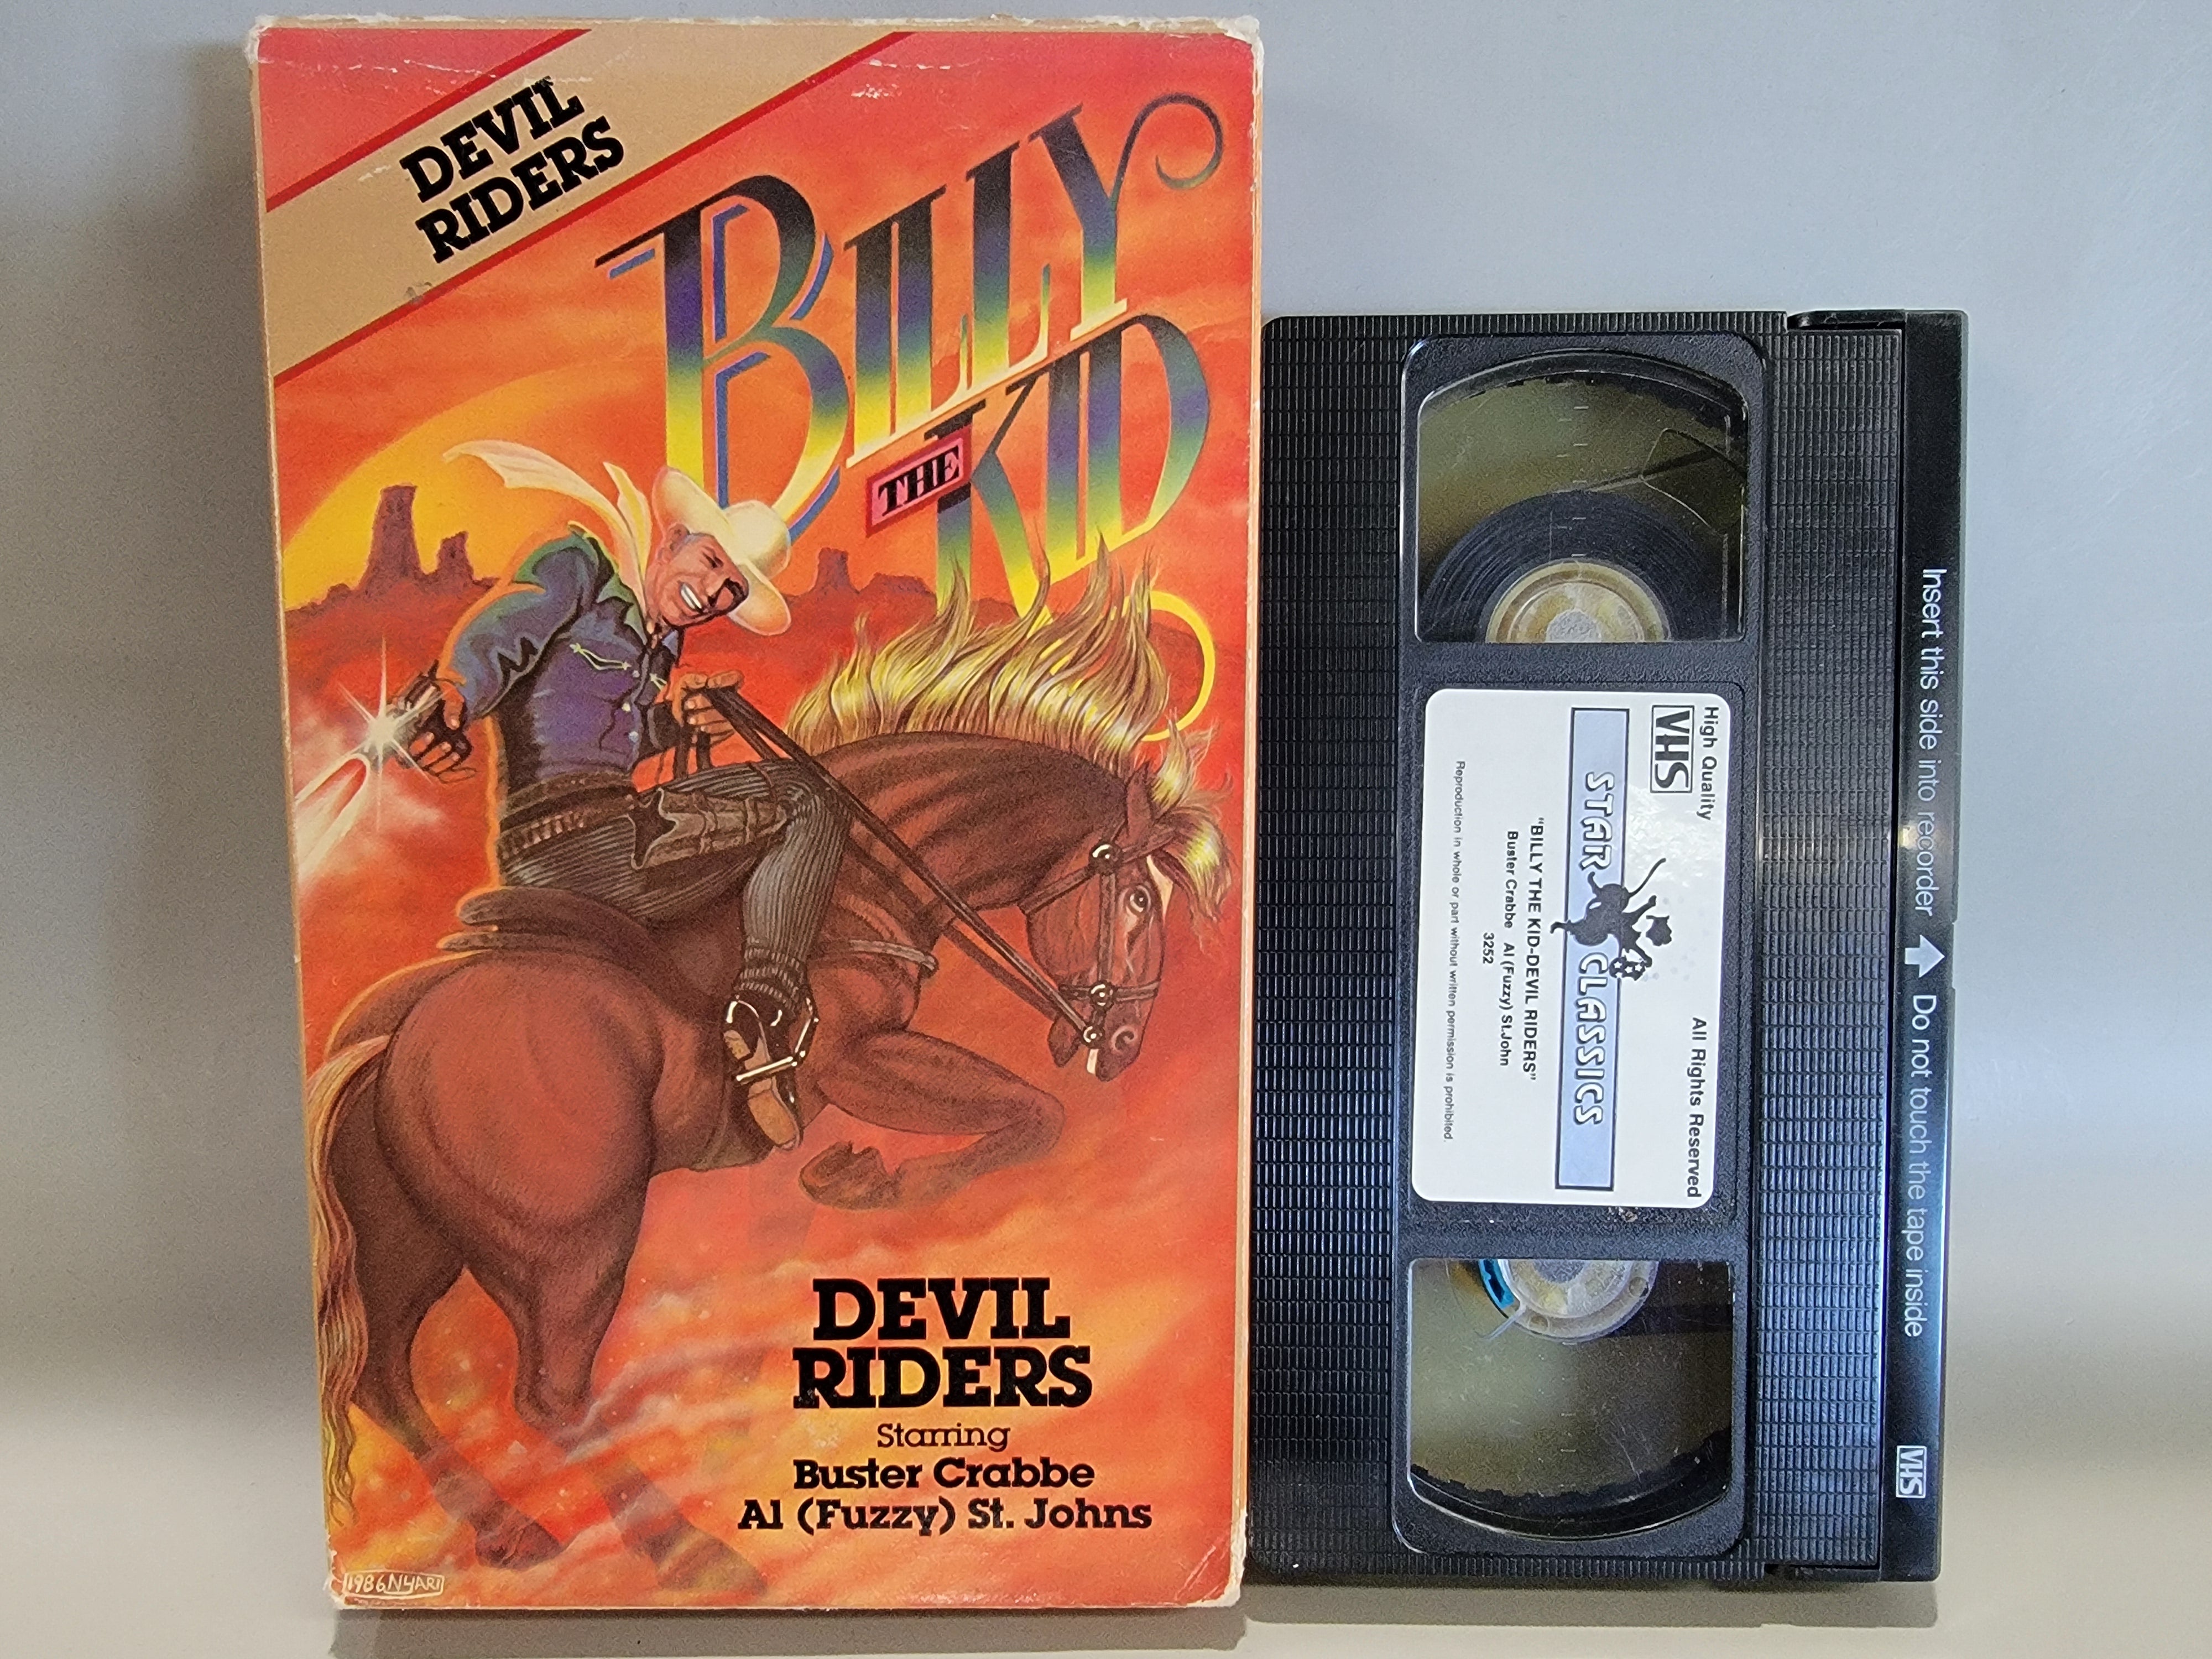 DEVIL RIDERS VHS [USED]